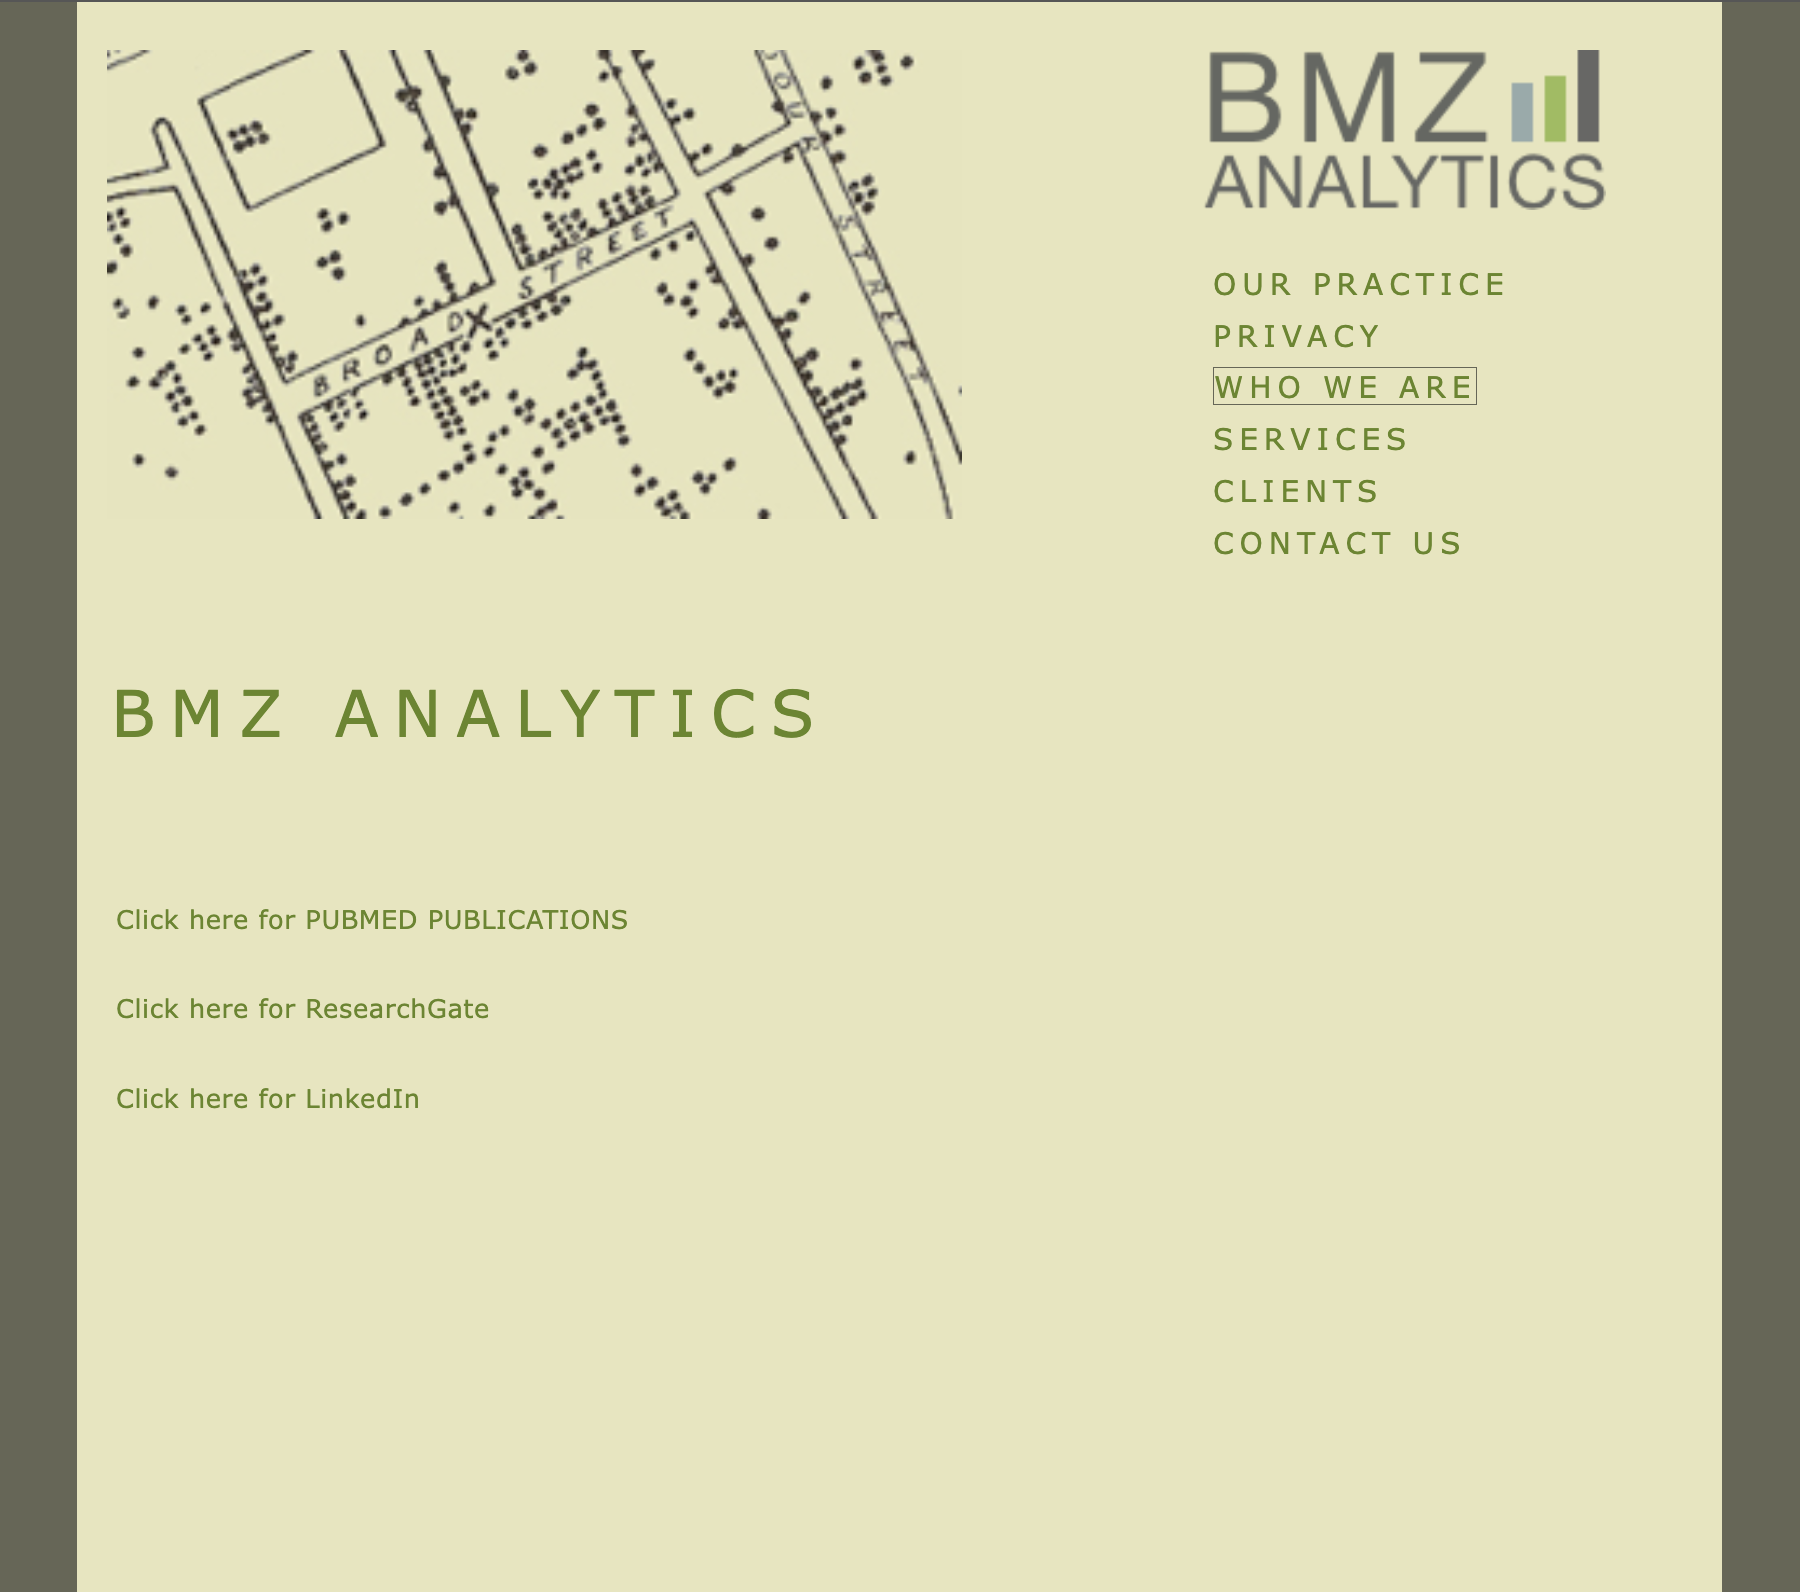 BMZ Analytics - Who We Are page